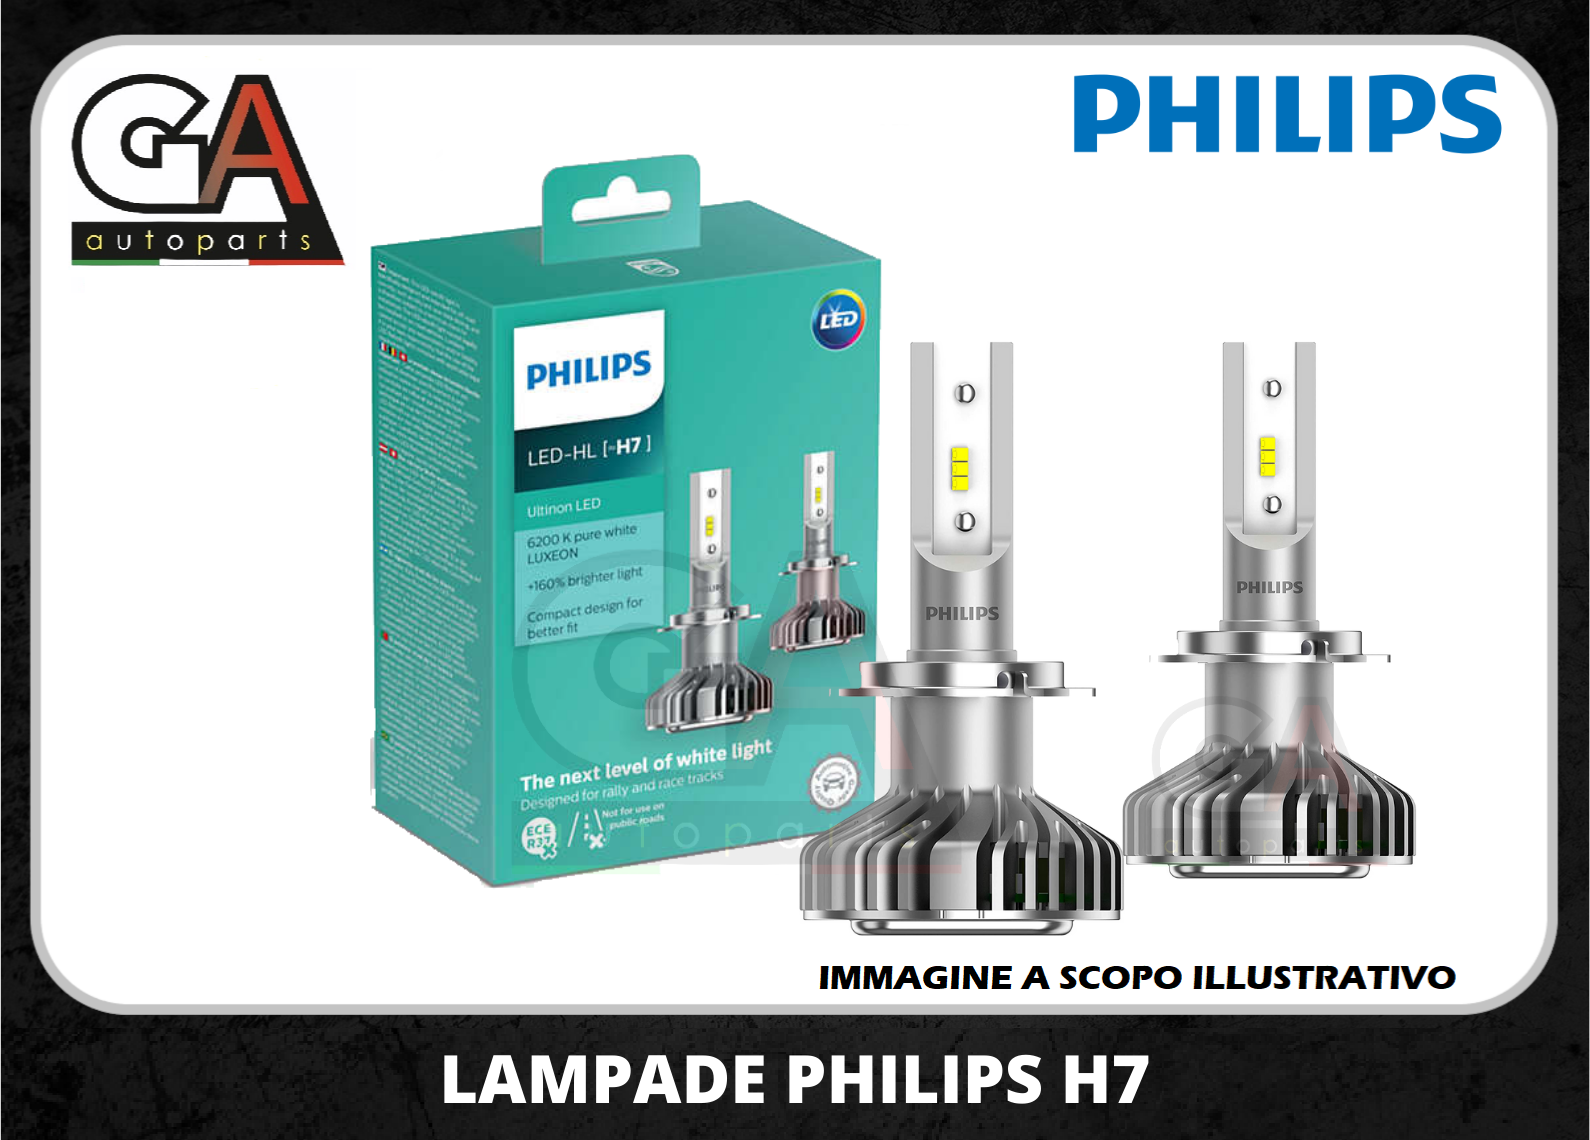 https://www.gautoparts.it/sincro_where/media/provoci/00015/LAMPADE%20PHILIPS%20H7%2011972ULWX2.png